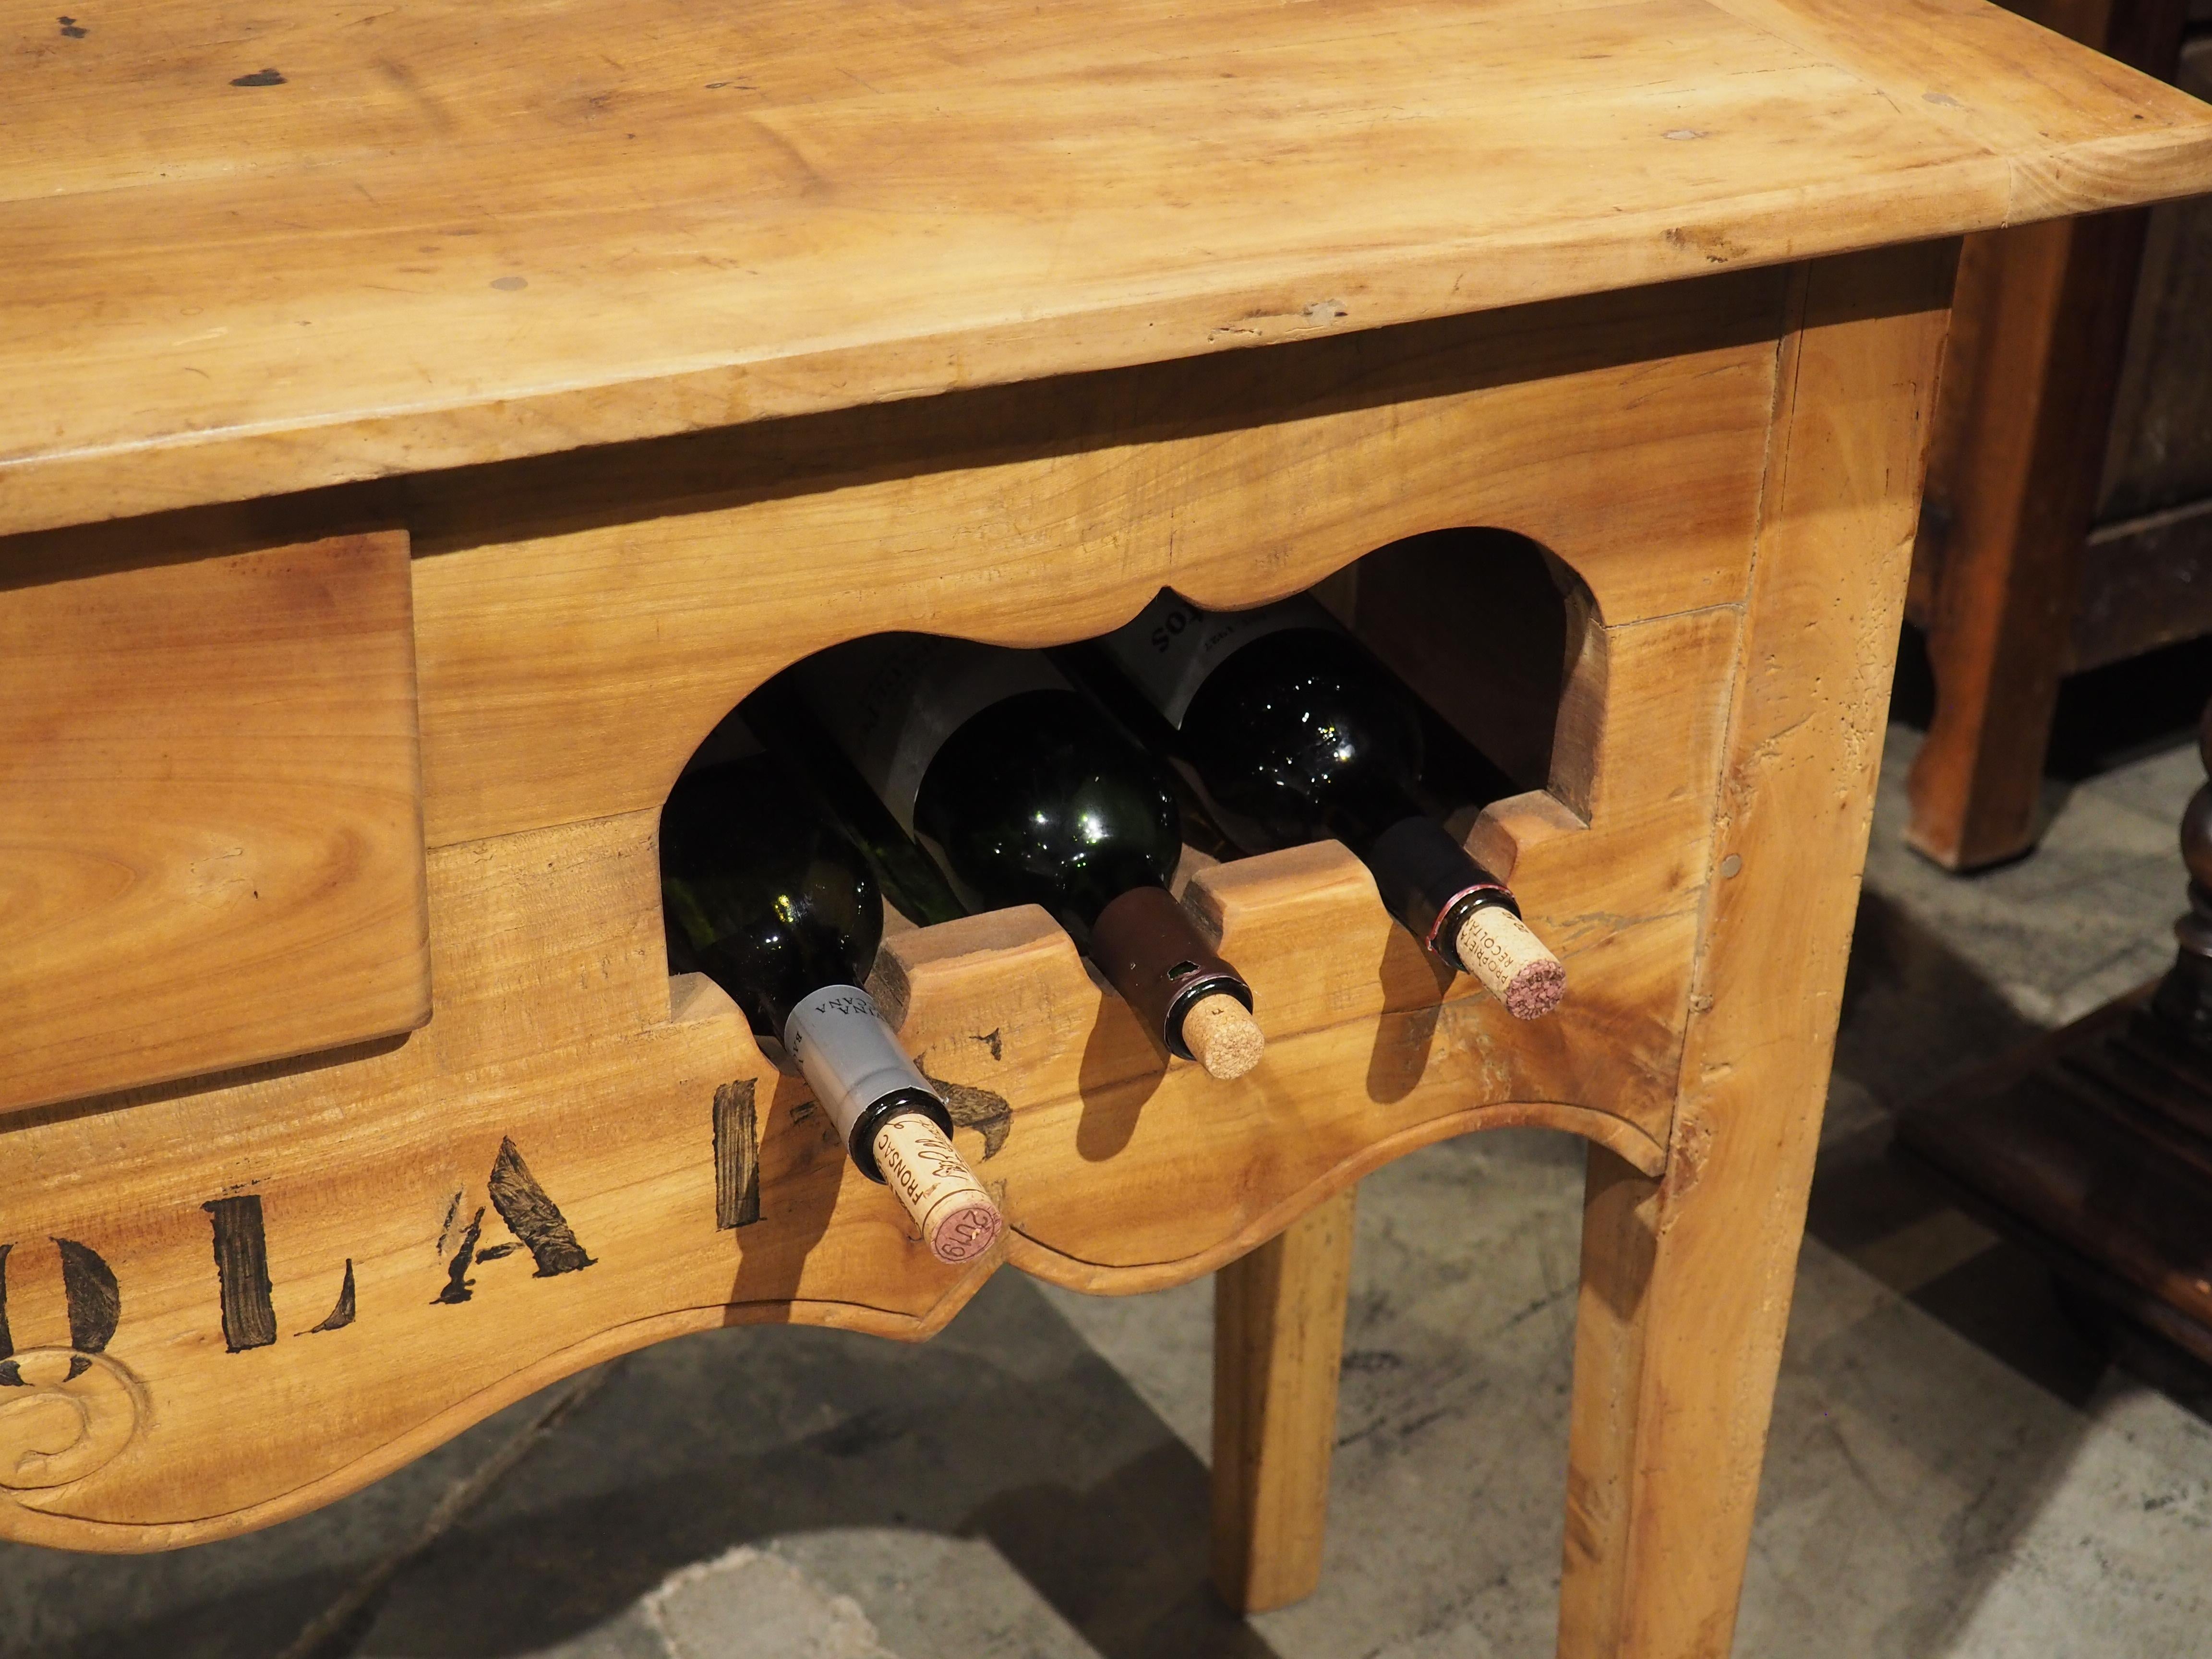 Infuse any wine room, bar area, or kitchen with a touch of aesthetics and functionality, thanks to this wooden French console table with six bottle wine rack. Two artfully designed three-bottle compartments on either side of a functional center